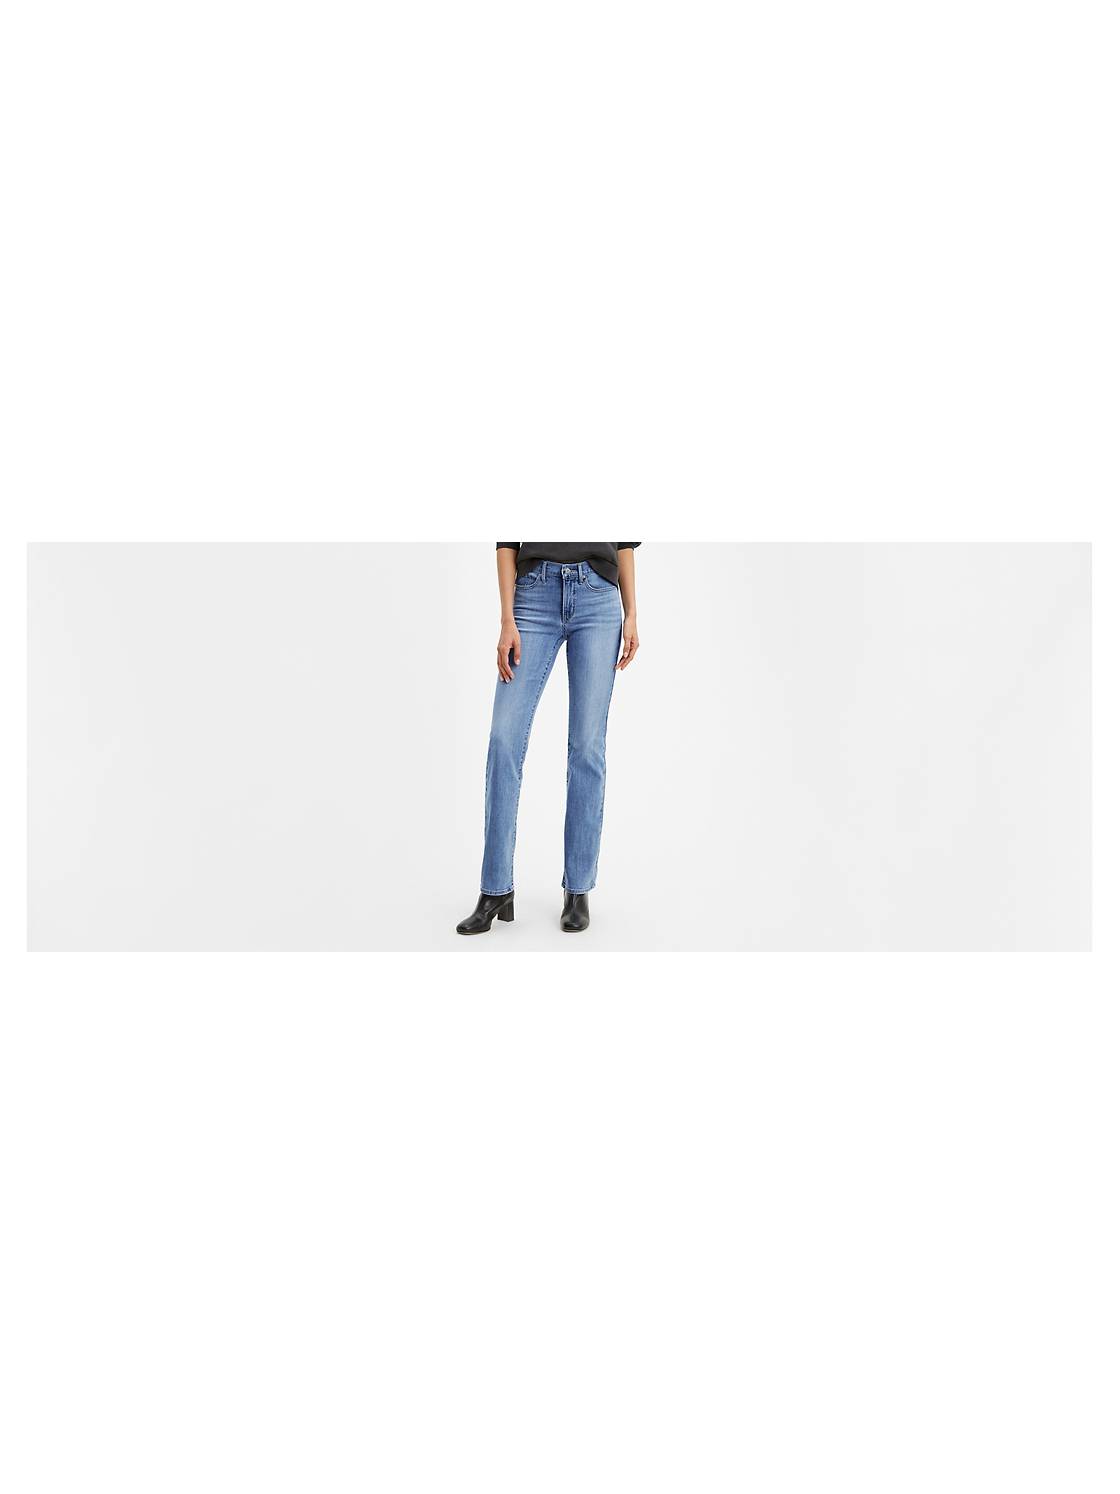 Bootcut Jeans for Women, High Waisted Bootcut Jeans